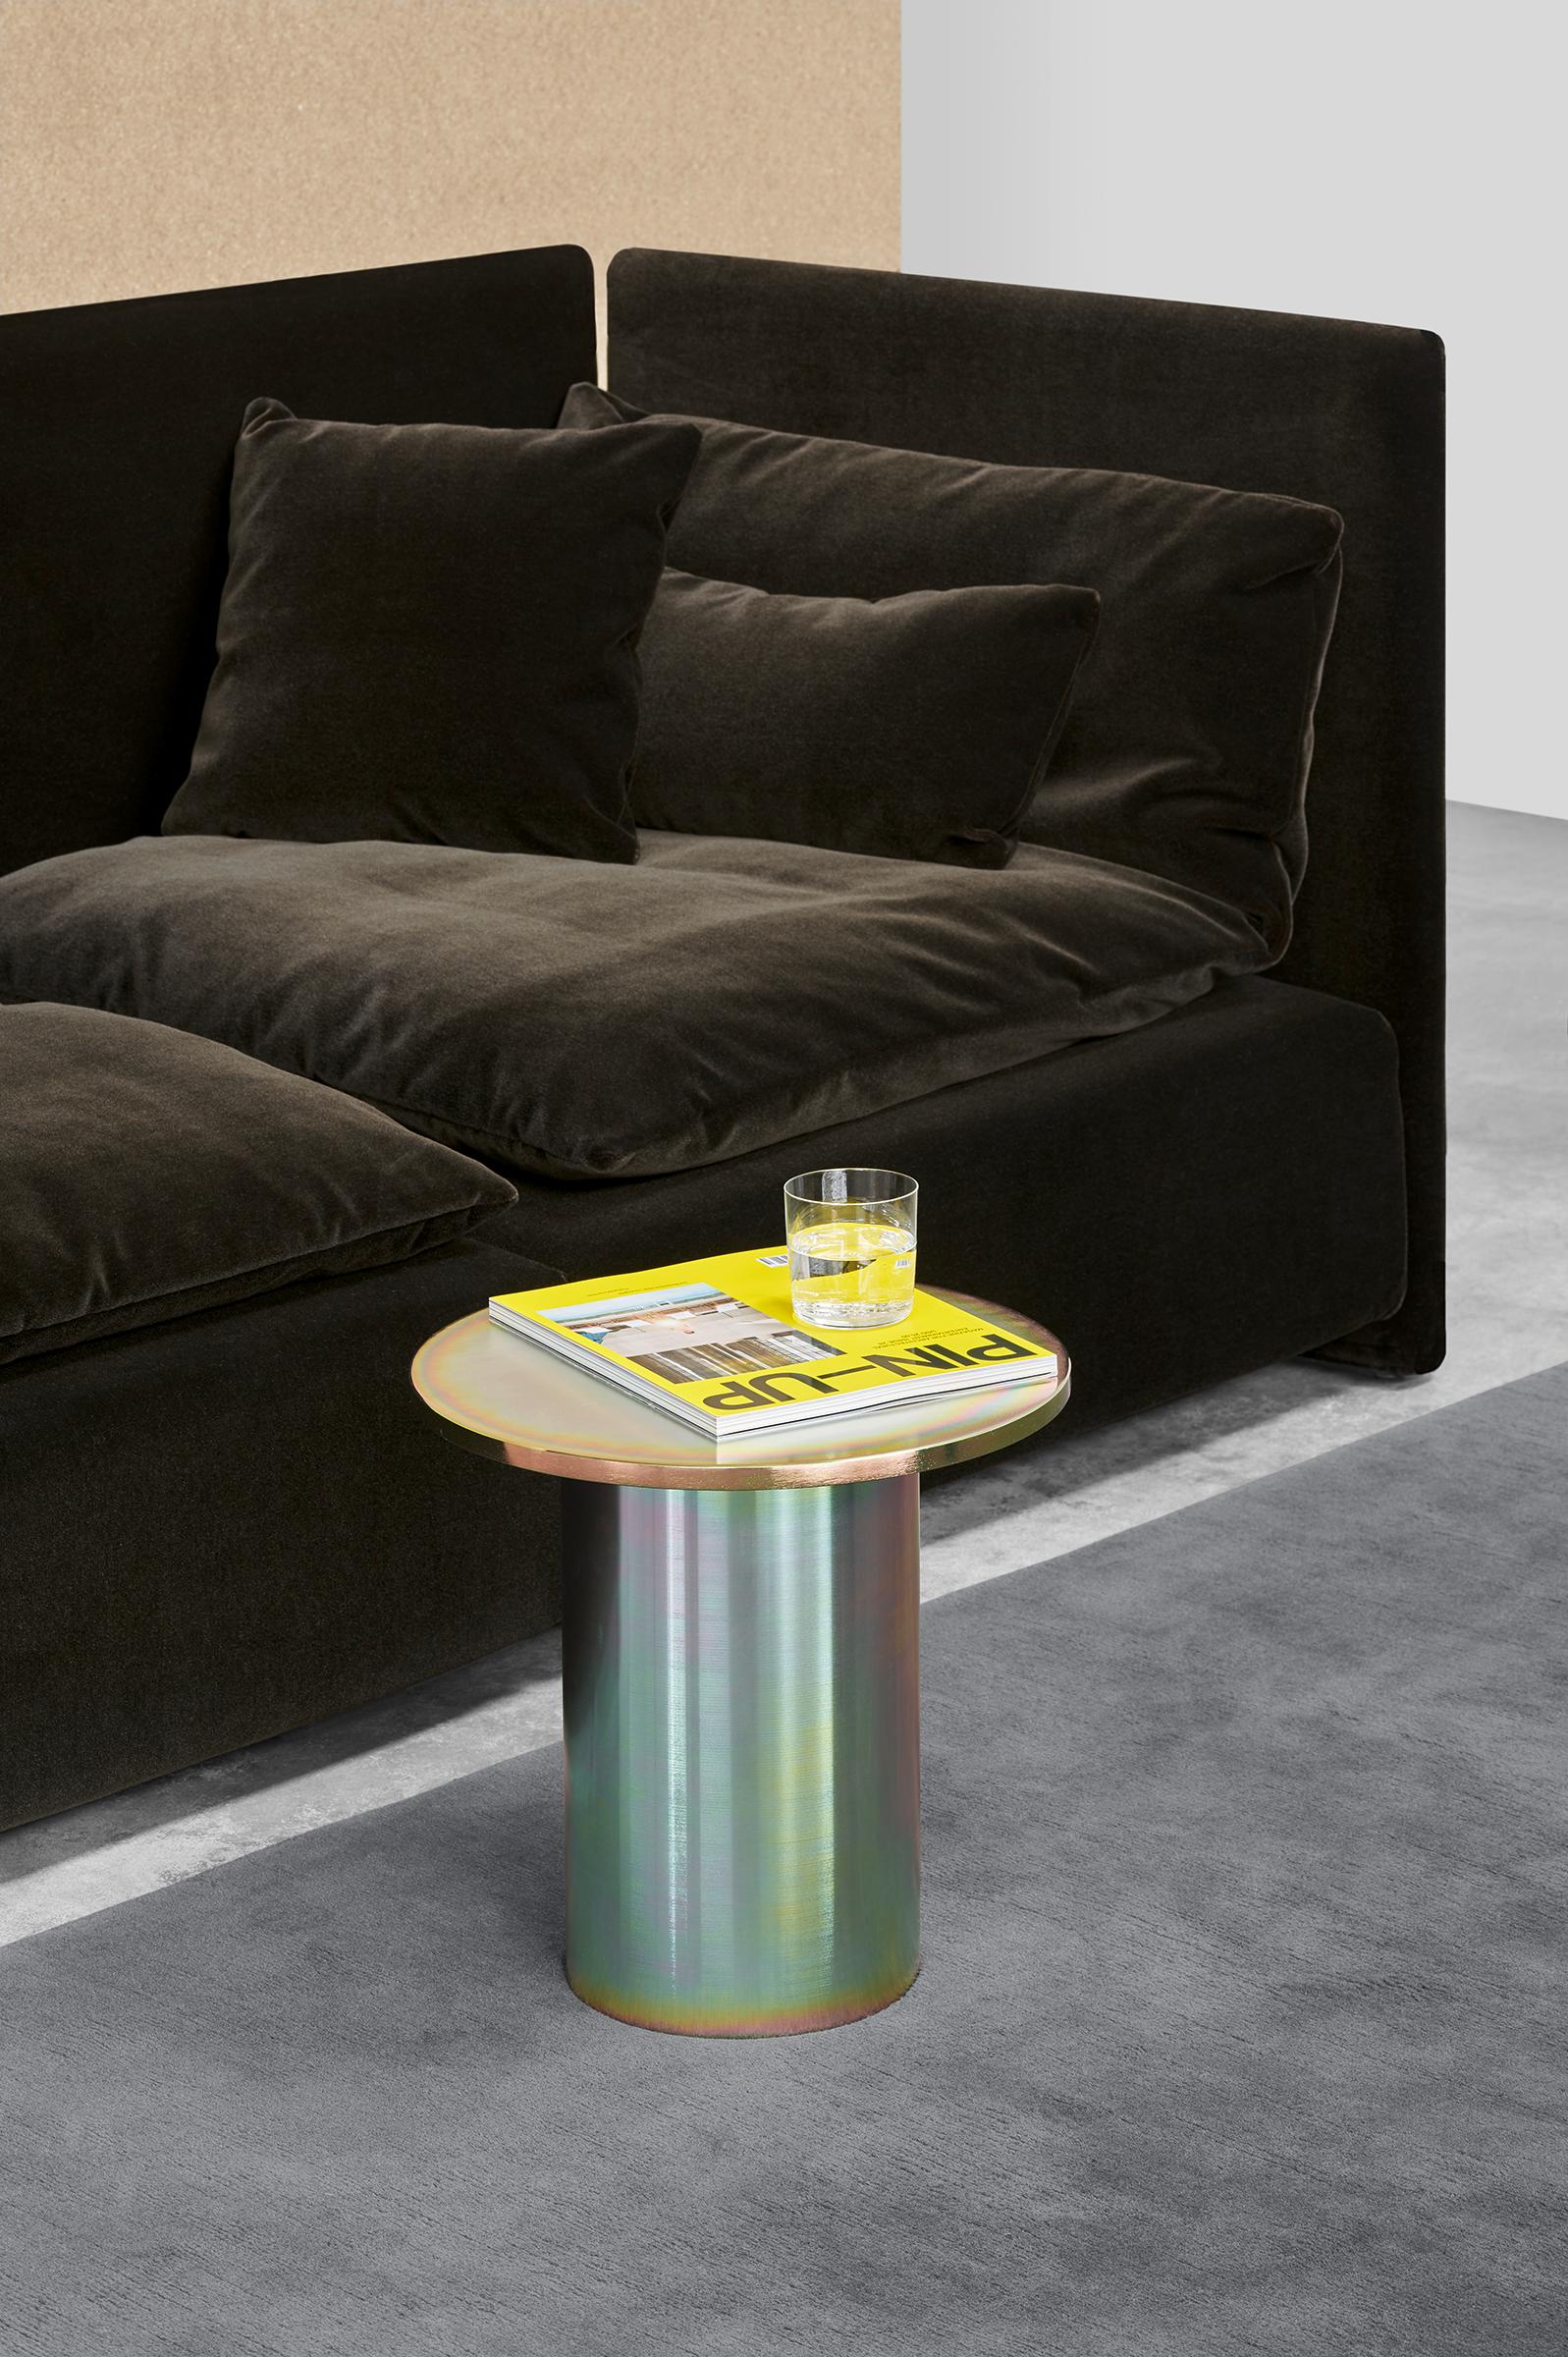 he iconic side table ENOKI by Philipp Mainzer is introduced in all metal, highlighting its essential and minimal form. Made of steel, powder-coated in colours silk grey, pure orange and jet black or zinc-plated in a rainbow hued version the table